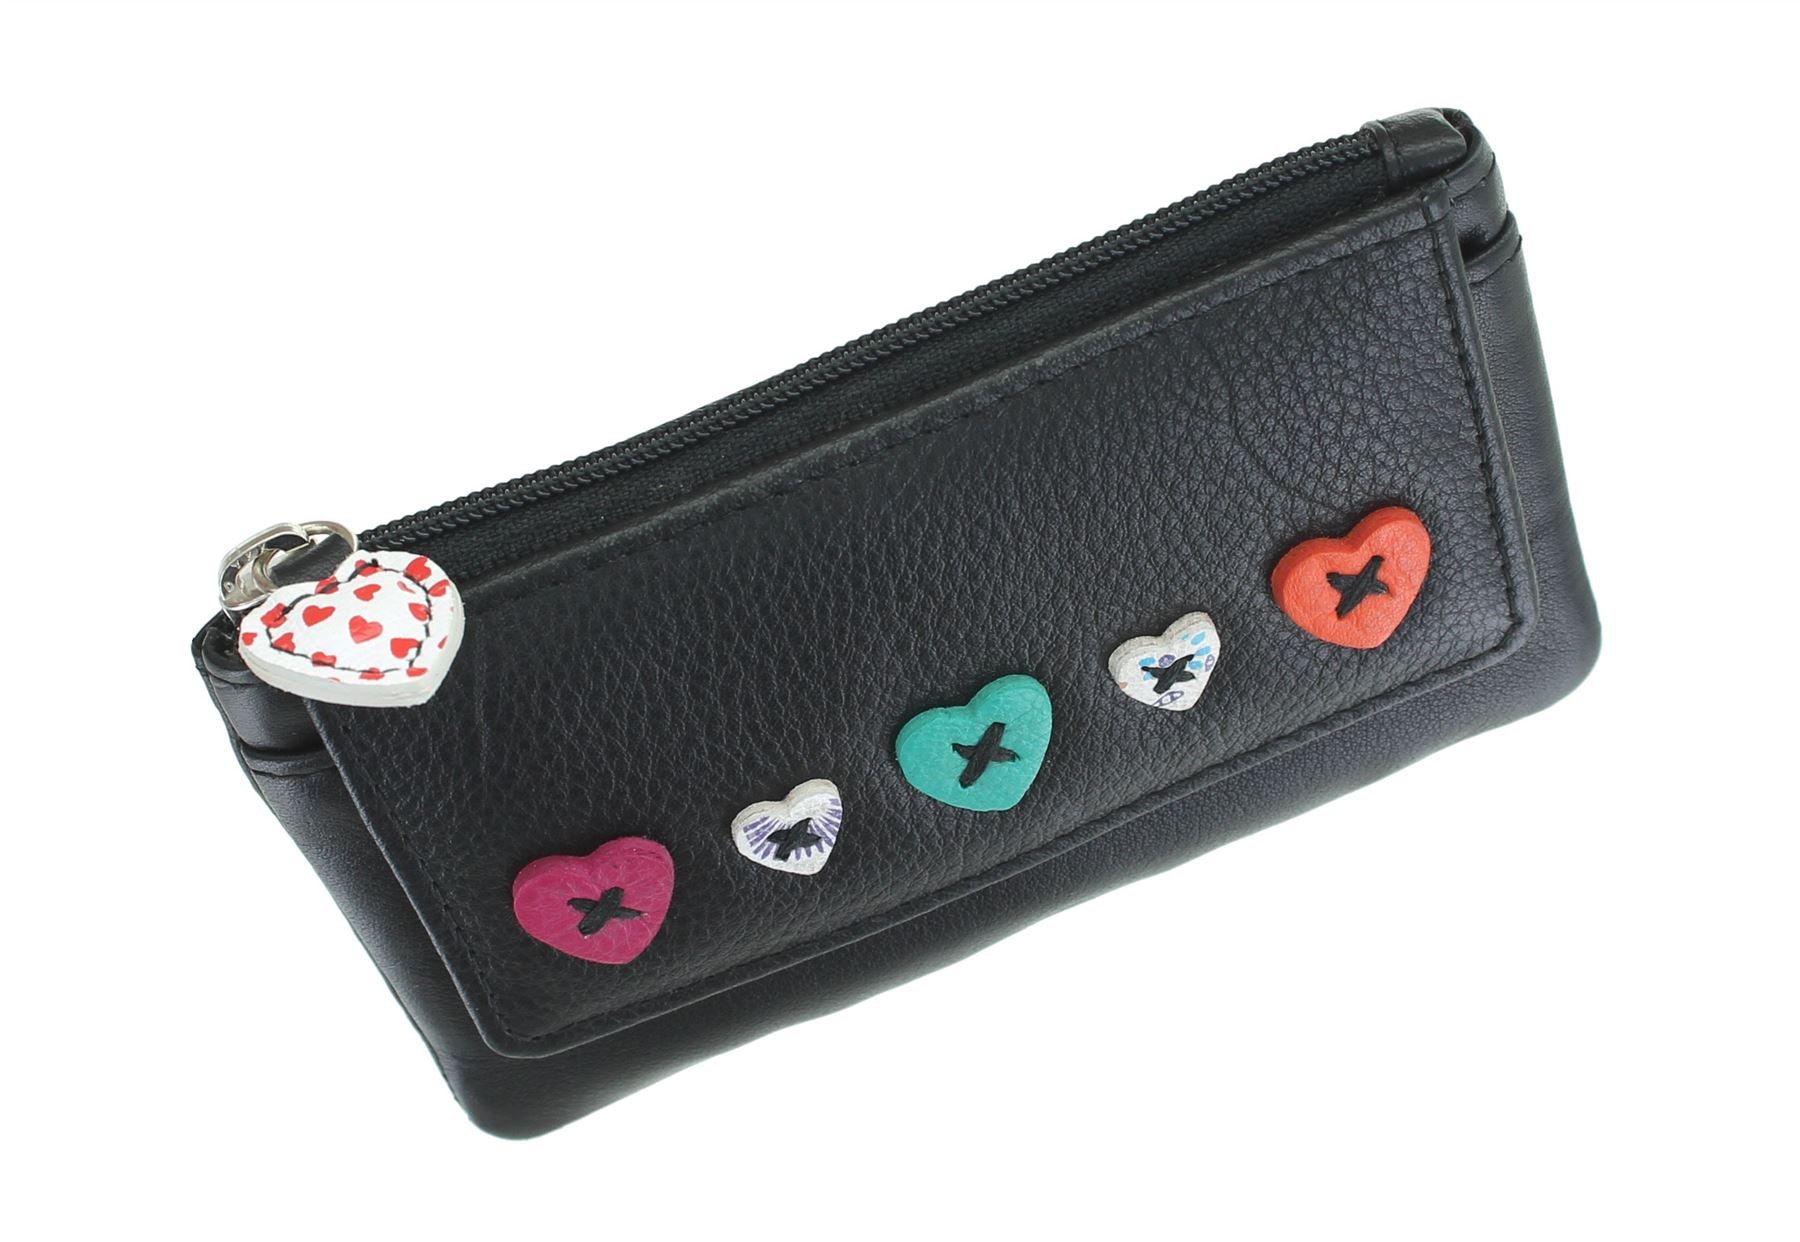 Ladies Dual Twist Top Soft Leather Coin Purse by London Leather